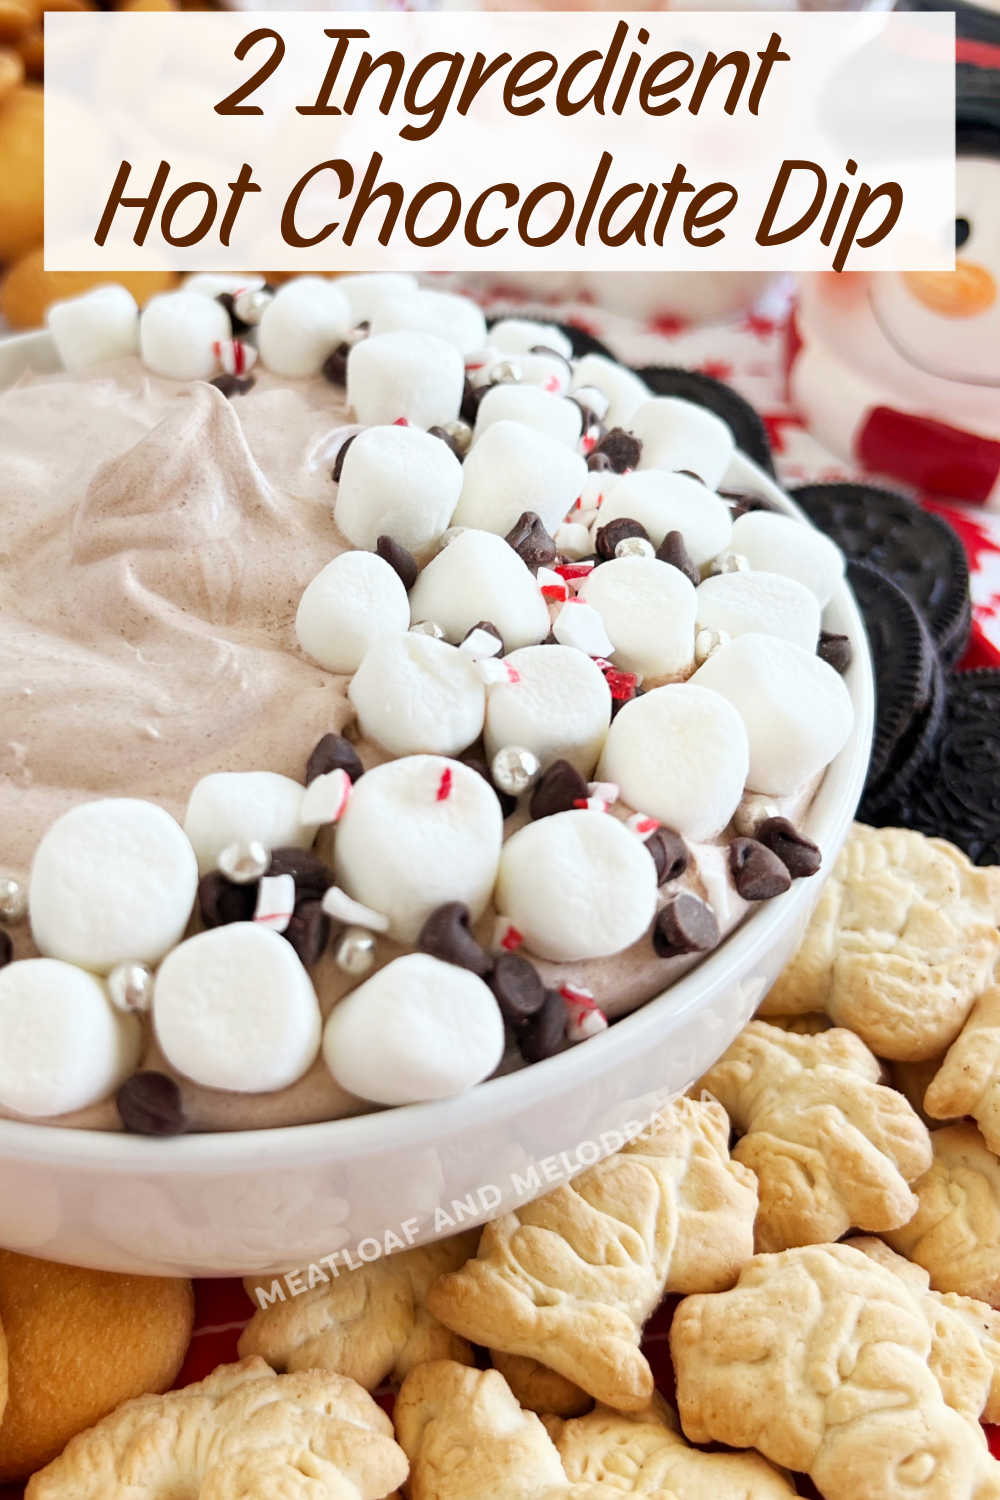 Hot Chocolate Dip is an easy no bake dessert dip made with hot cocoa mix and Cool Whip. This easy dessert recipe is perfect for holiday parties and family gatherings throughout the holiday season! via @meamel